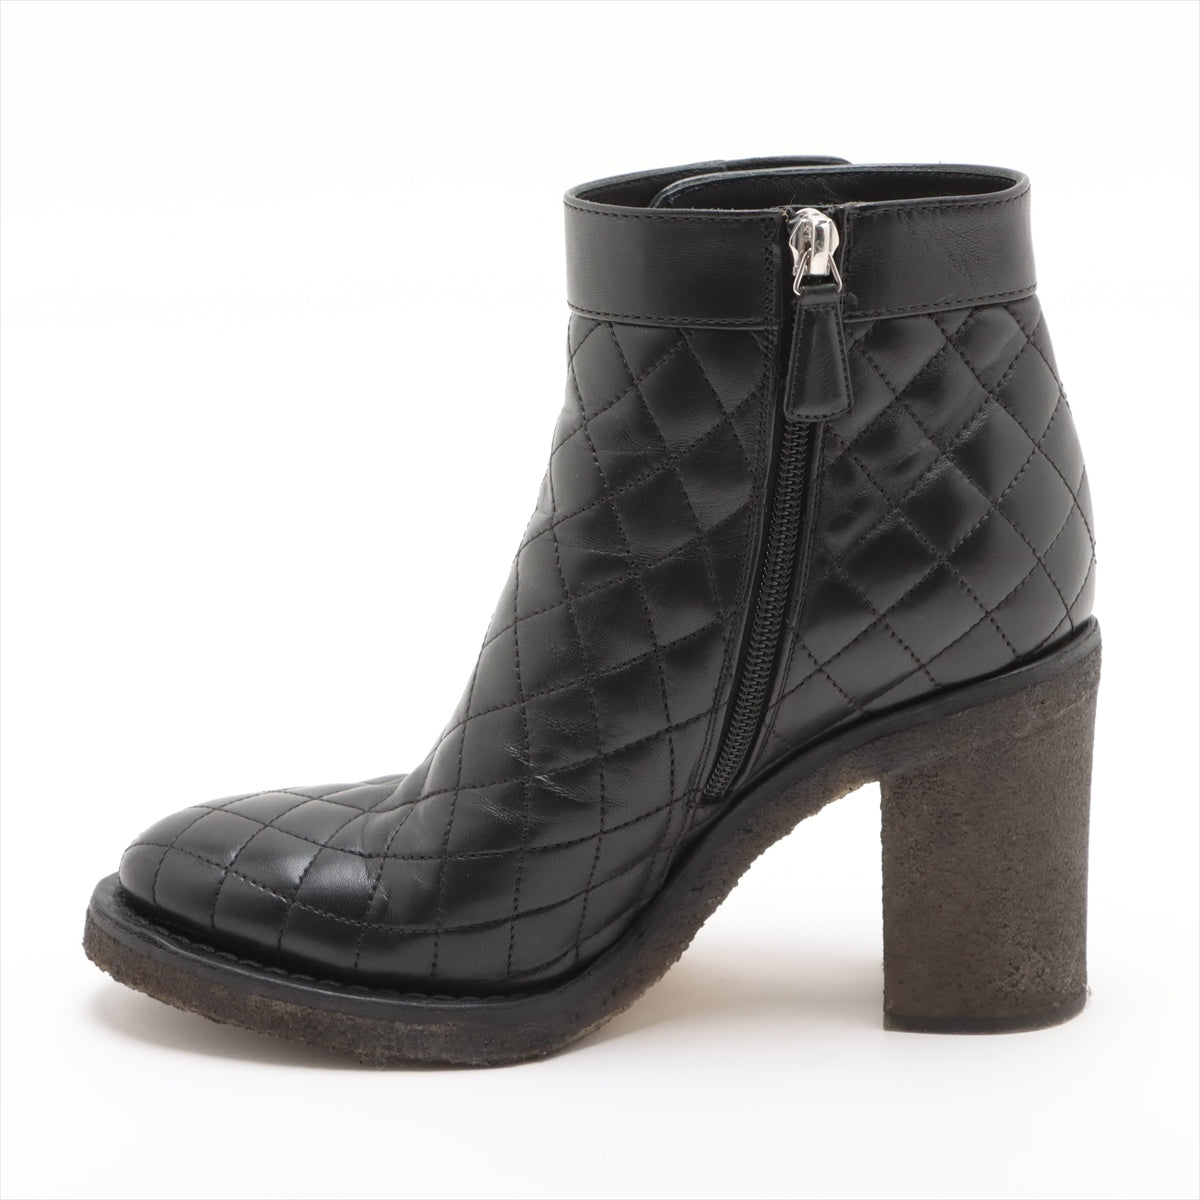 Chanel Coco Mark Matelasse Leather Short Boots 37 Ladies' Black G31285 double turn lock